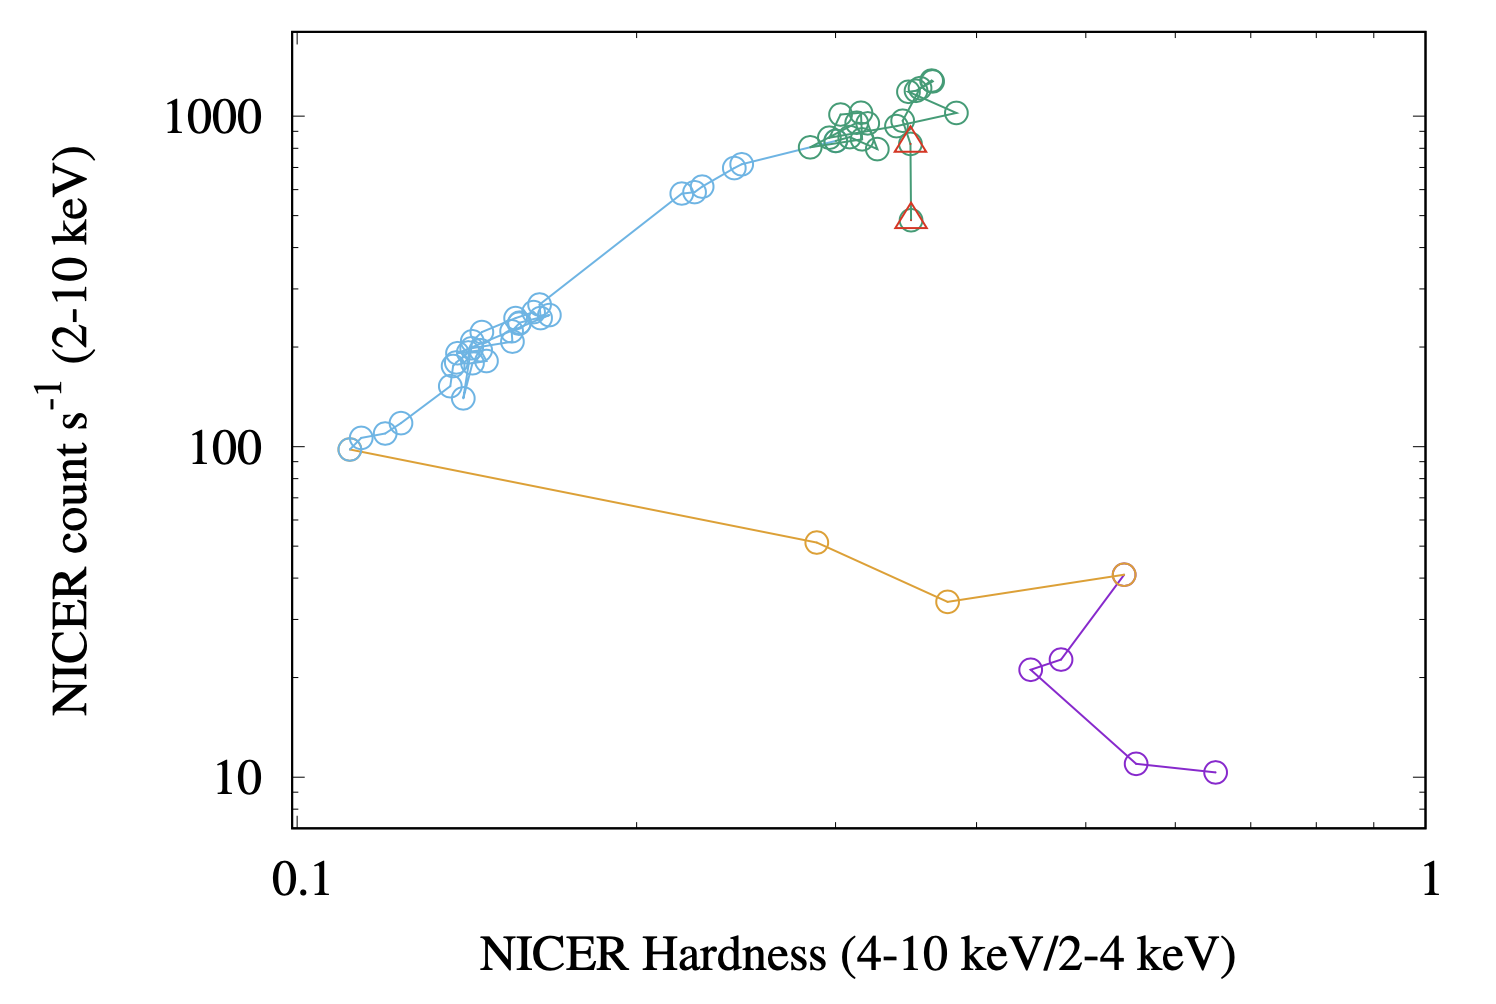 The hardness-intensity diagram for the likely black-hole binary system Swift J1728-3613 during its 2019 outburst, as measured by NICER. The total rate of X-ray photon detections in the 2-10 keV energy band is on the vertical axis, while the ratio of high- to low-energy photons (or hardness: 4-10 keV relative to 2-4 keV) is on the horizontal axis. The time-evolution of Swift J1728 on this diagram was counterclockwise, starting at the top. The colors of lines and circular points represent different accretion states: soft-intermediate (green), soft (blue), hard-intermediate (orange), and hard (purple). The two triangular points indicate observations during which QPOs were detected (see next figure). Figure from Saha et al. (2023).